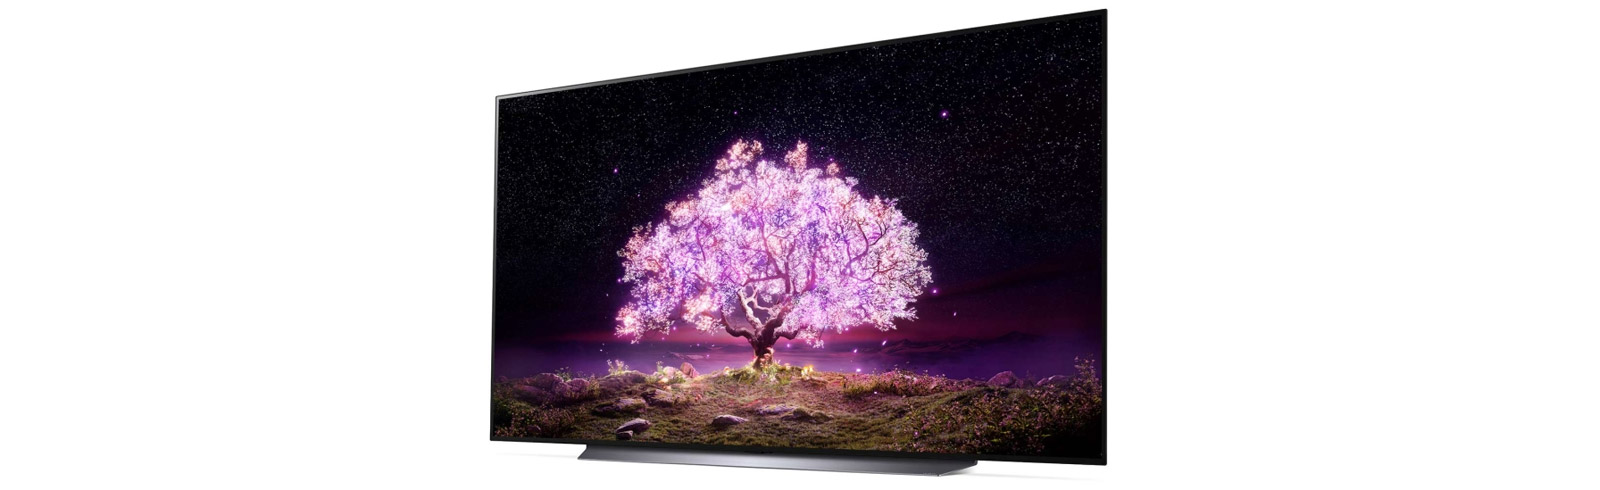 LG OLED OLED83C1PUA C1 83" at LG Partners Mall (Employee Purchase Plan required, YMMV) for $3600 + Tax / 77" $2225 + Tax